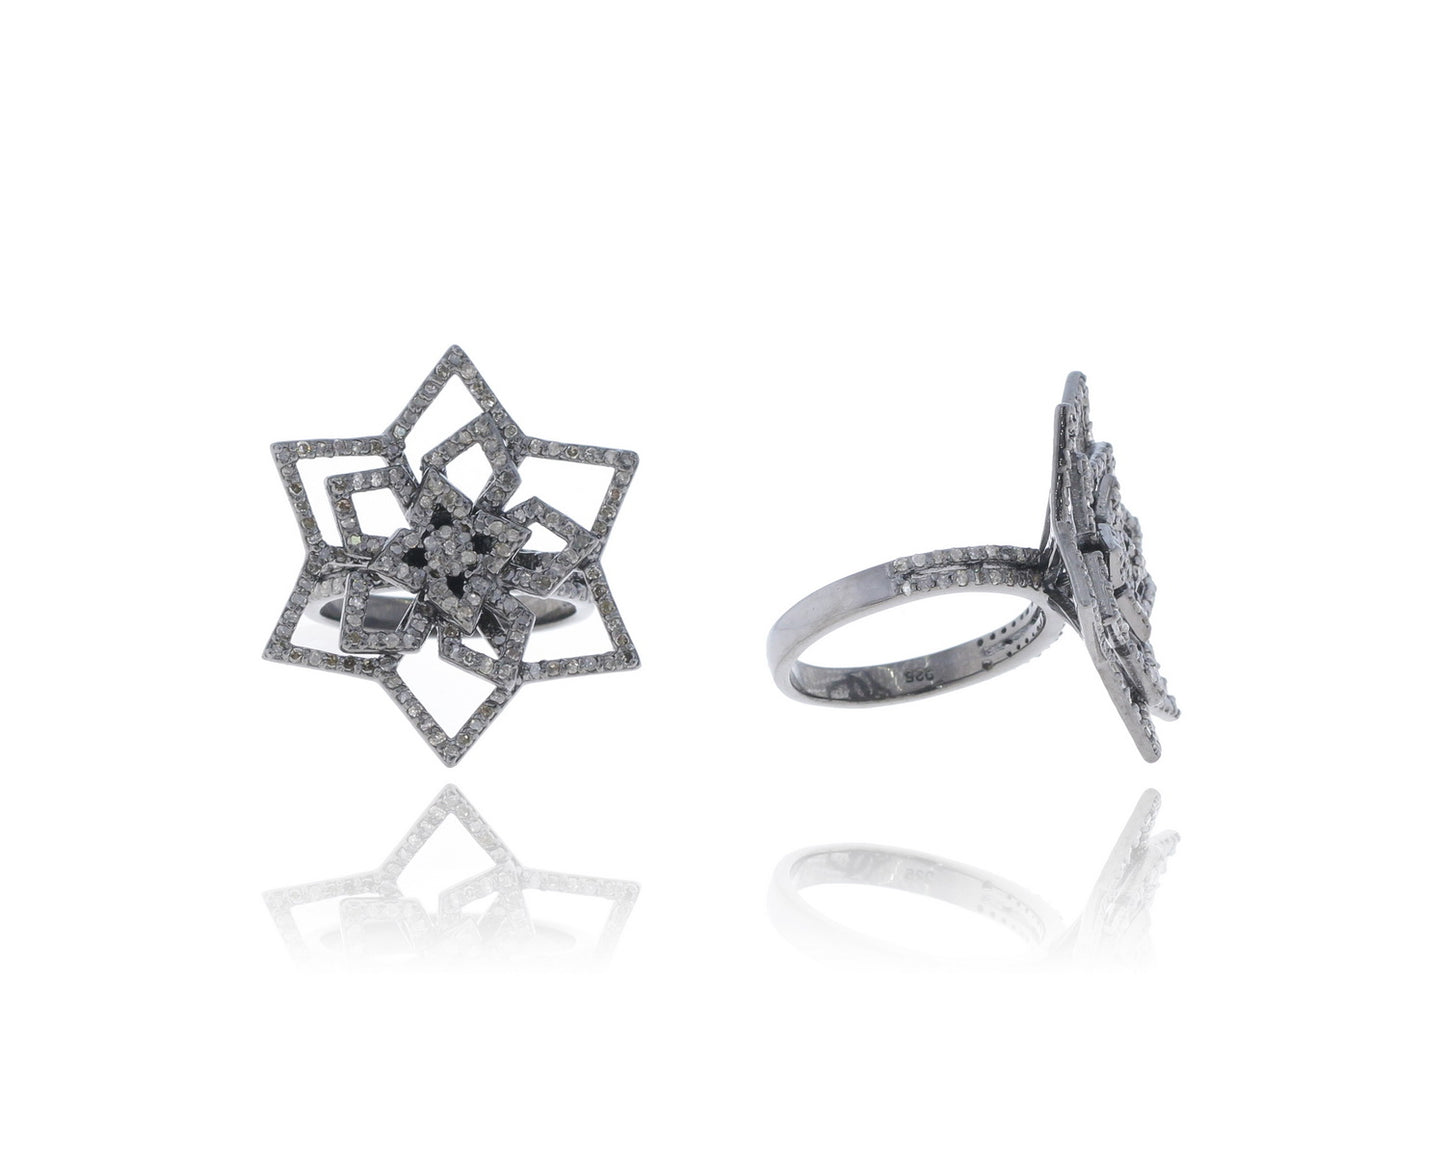 Diamond  Flower Diamond Ring, Pave Diamond Ring, Pave Flower  Ring, Approx 27 x 27mm. Sterling Silver